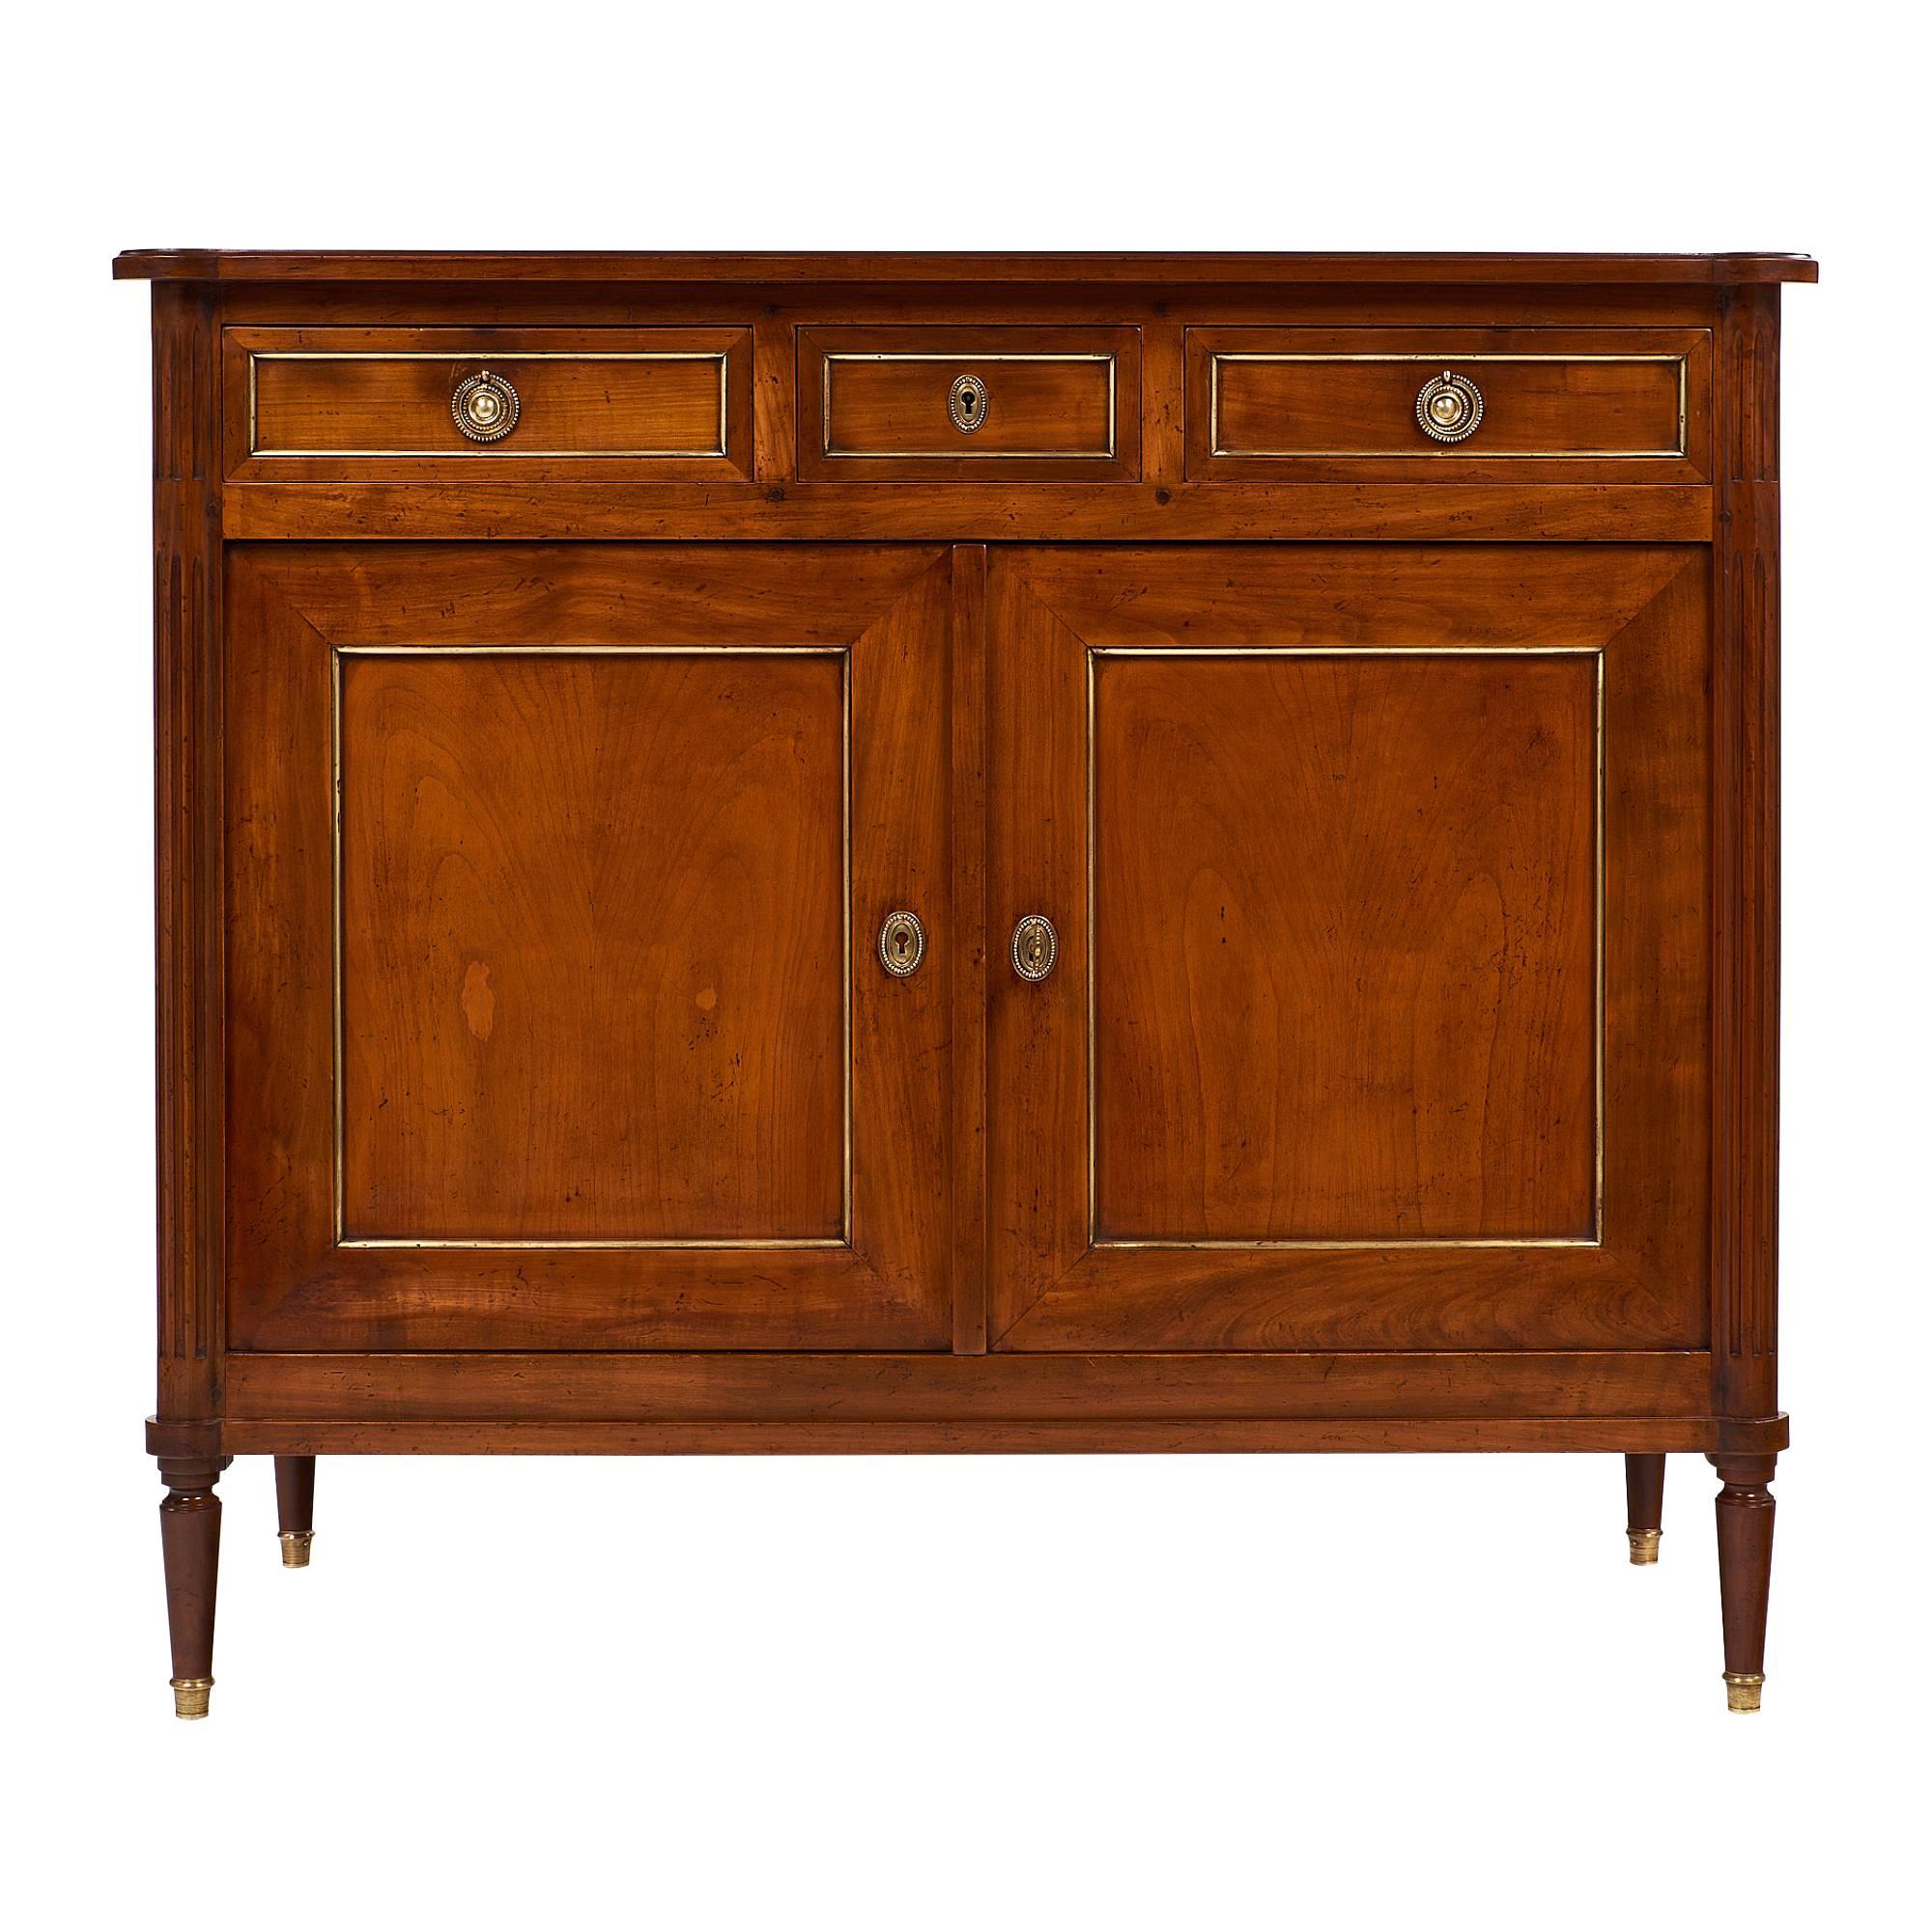 Louis XVI Style Antique French Cherry Buffet